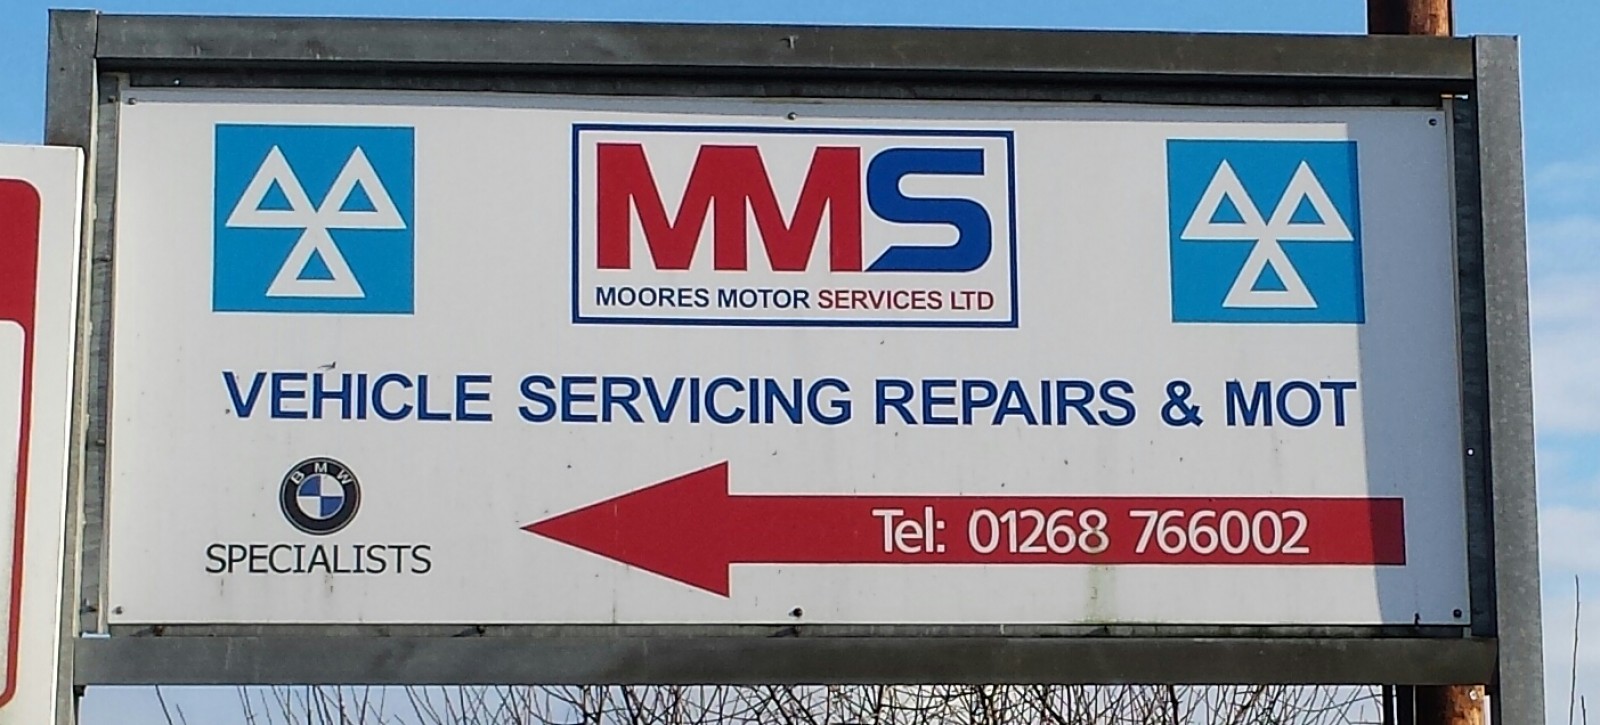 Image 5 of Moores Motor Services Ltd